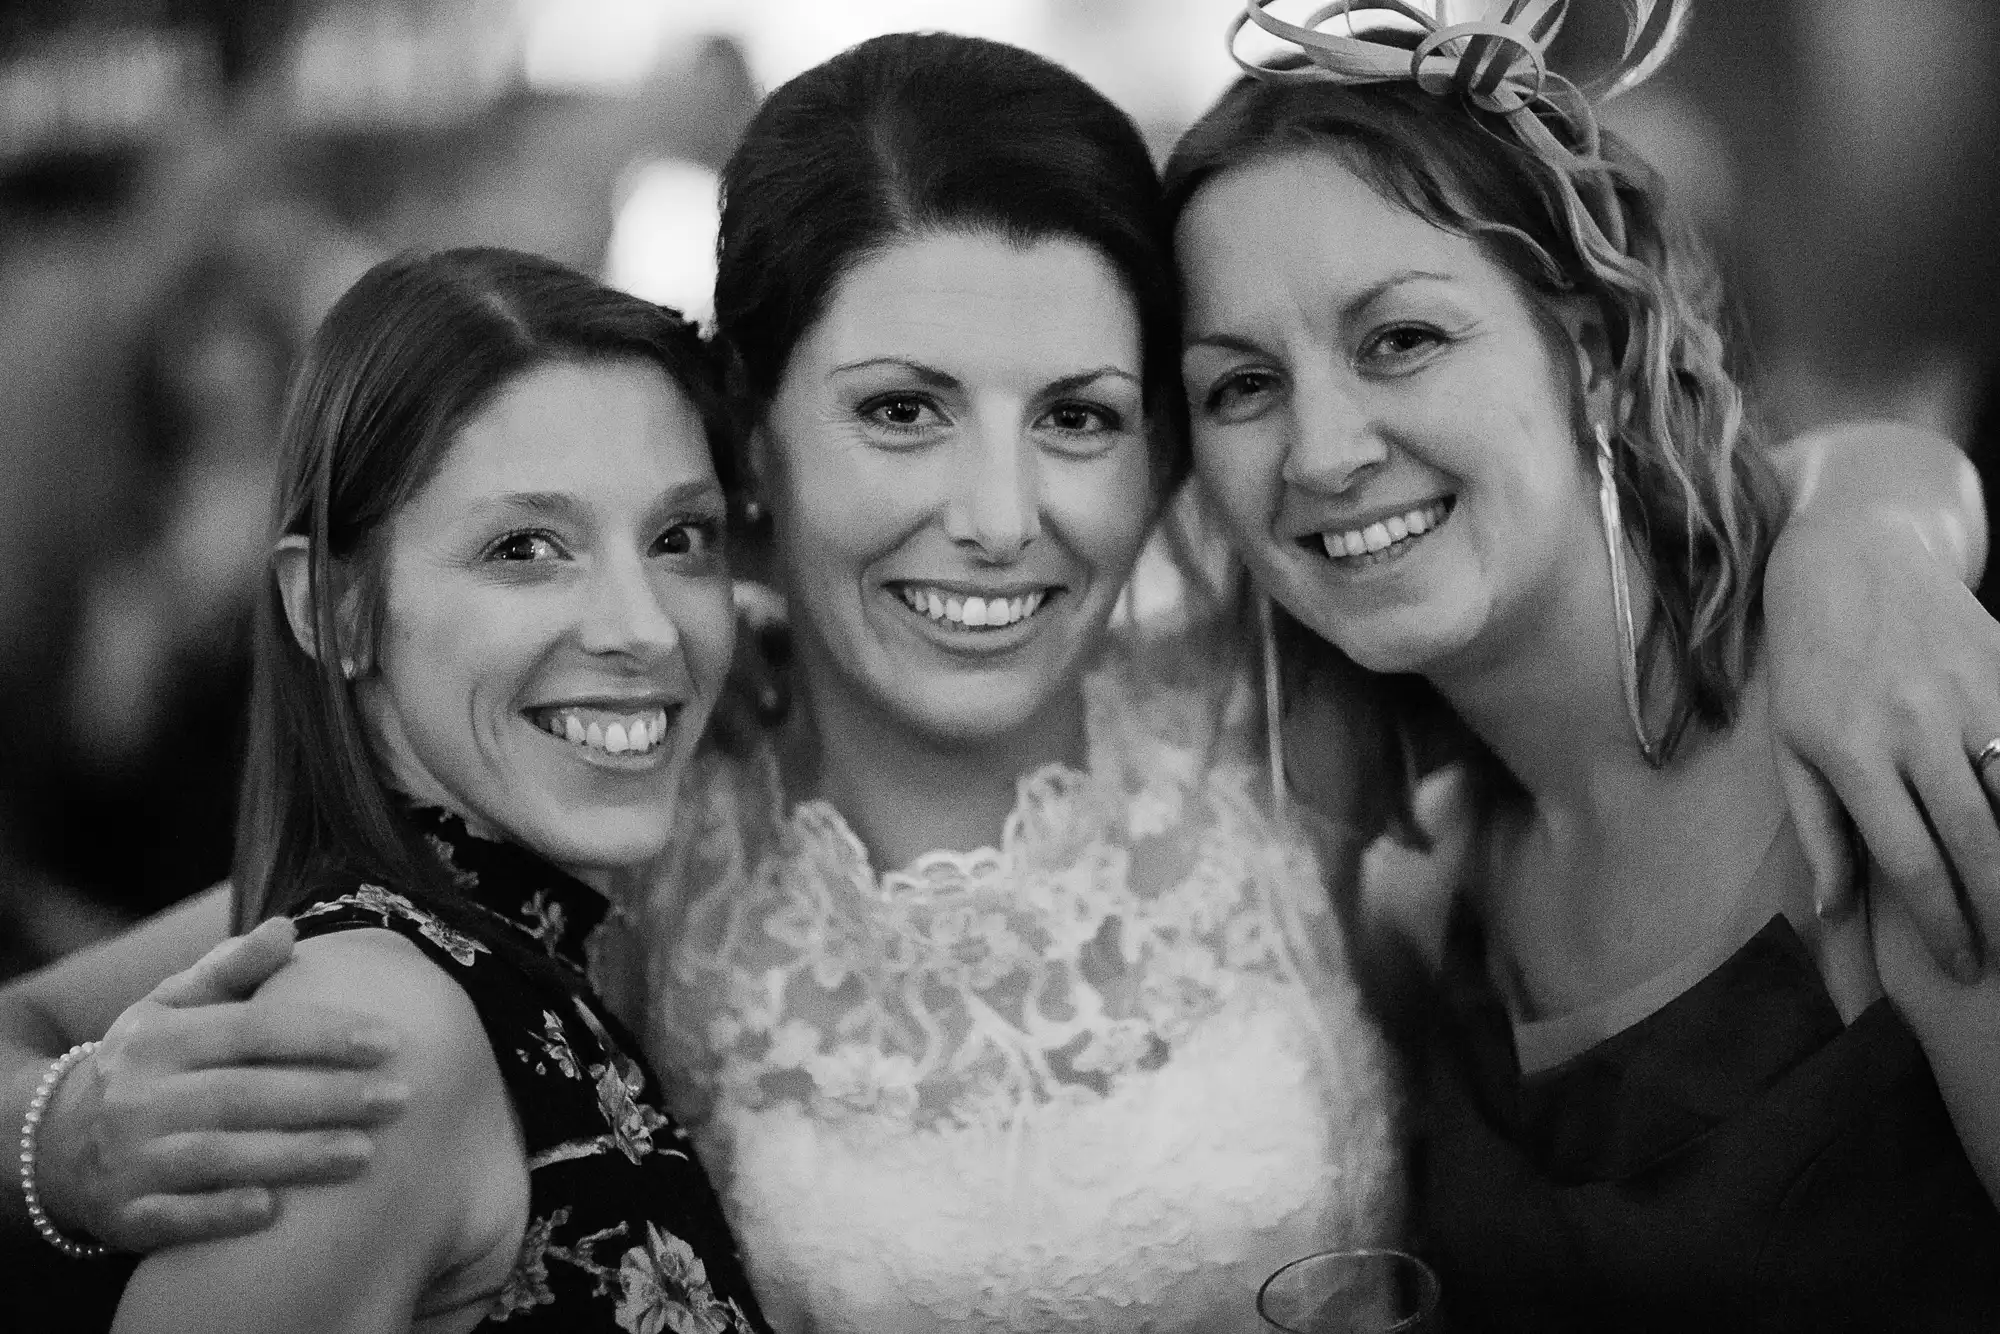 Three smiling women embracing at a festive event, one wearing a decorative headpiece, in a black and white photograph.